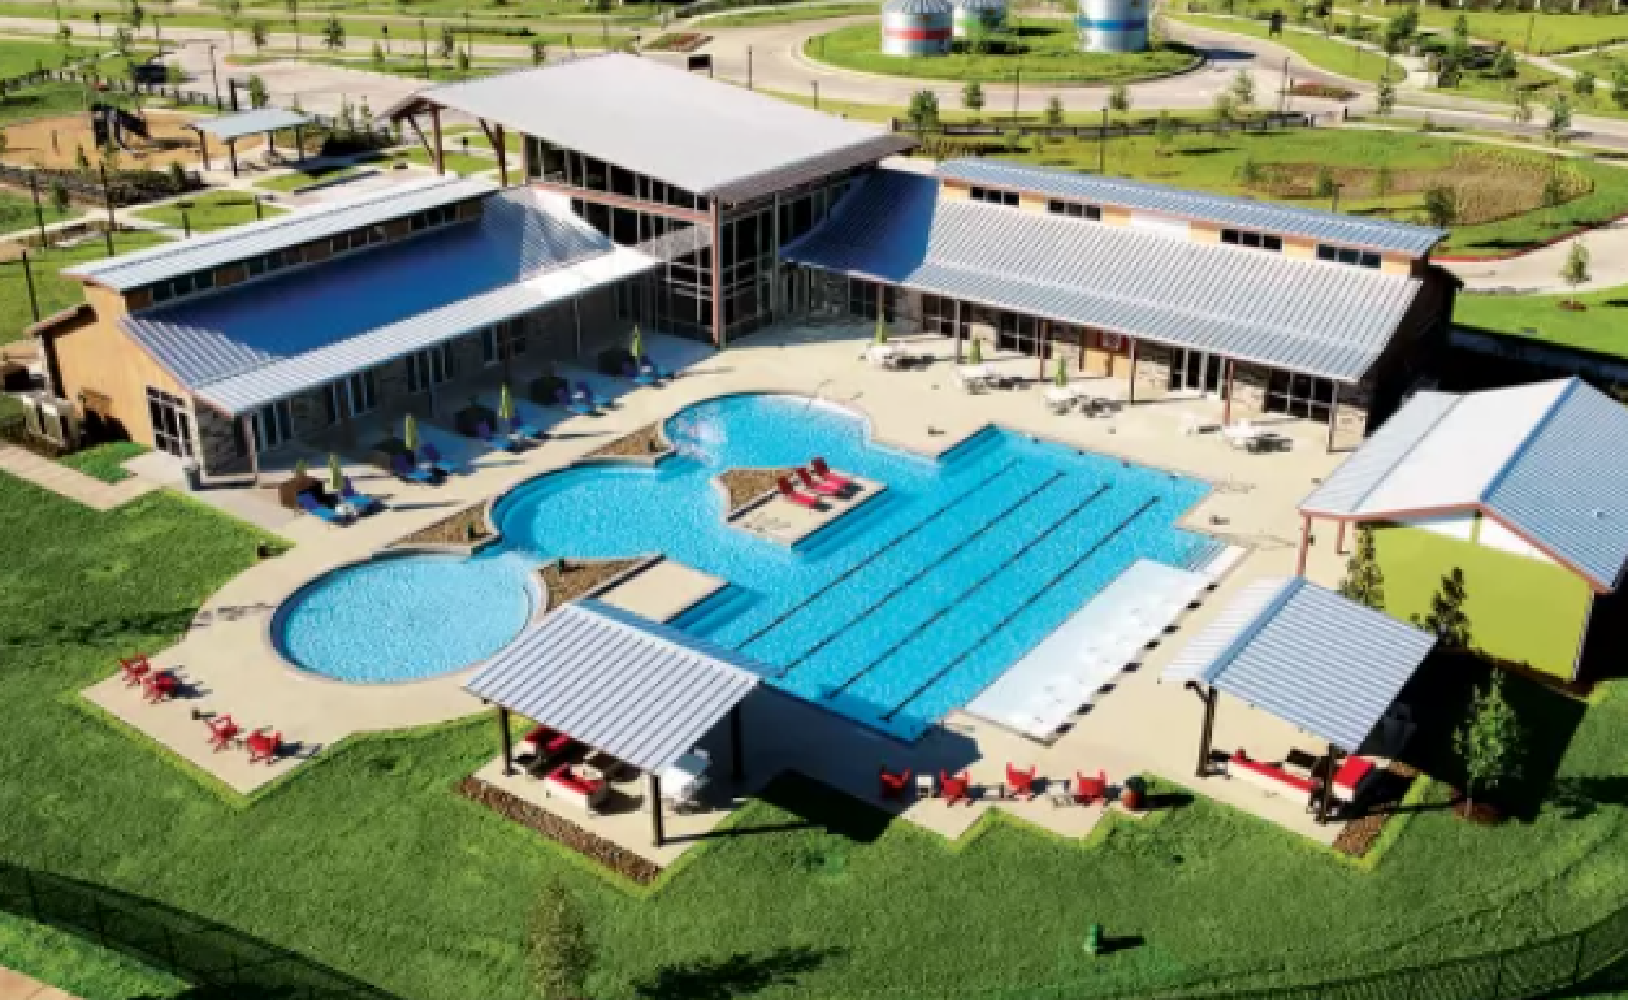 Issue Spotlight: Increasing the Recreational Facilities Limit